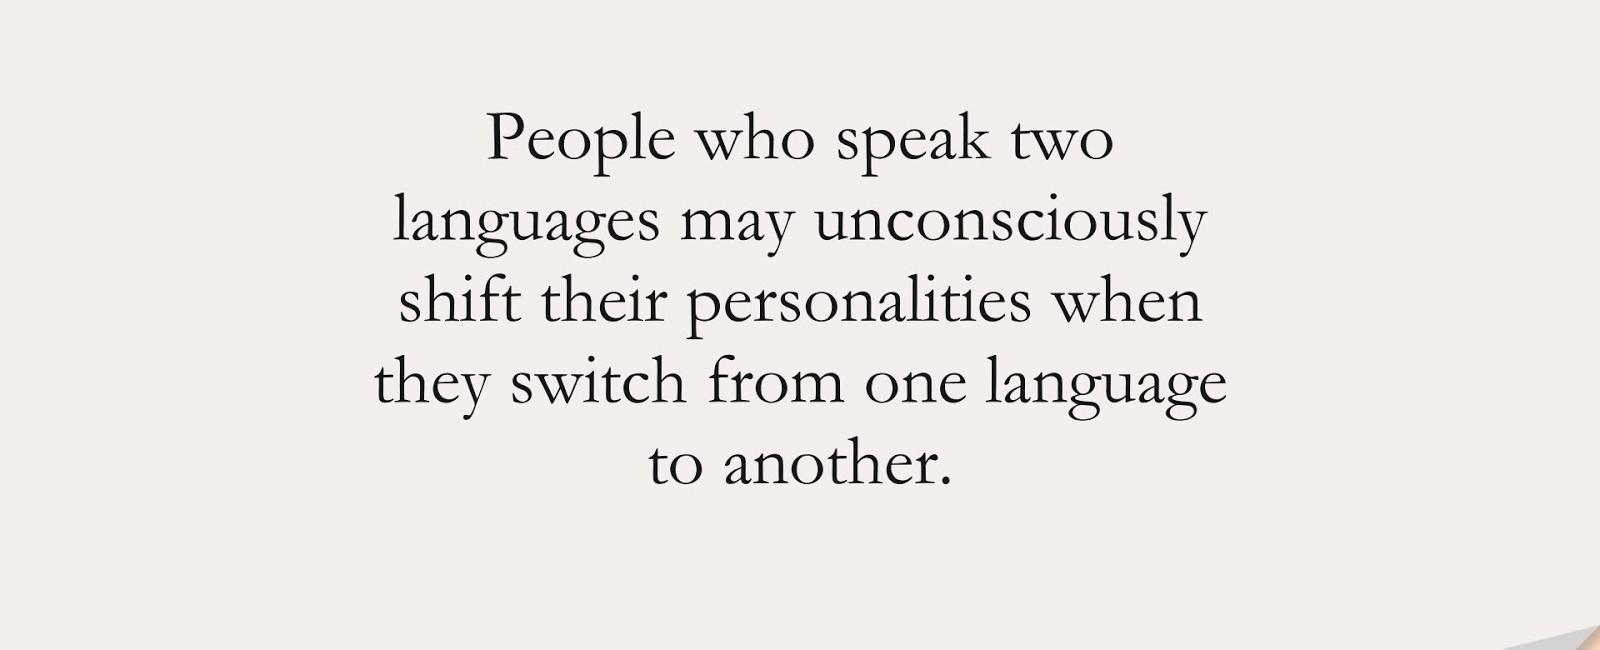 People who speak two languages may unconsciously shift their personalities when they switch from one language to another